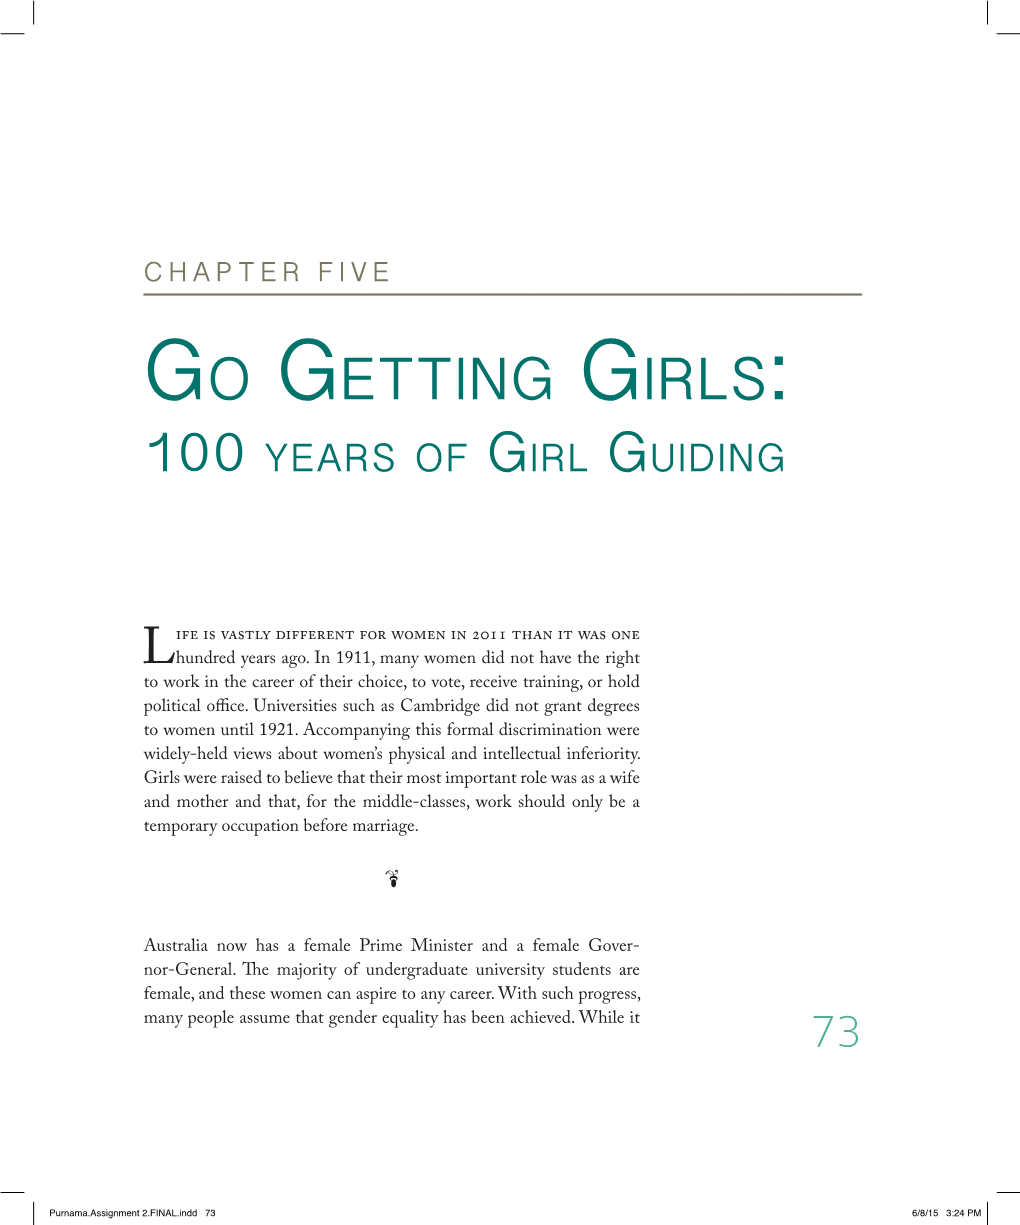 Go Getting Girls: 100 Years of Girl Guiding